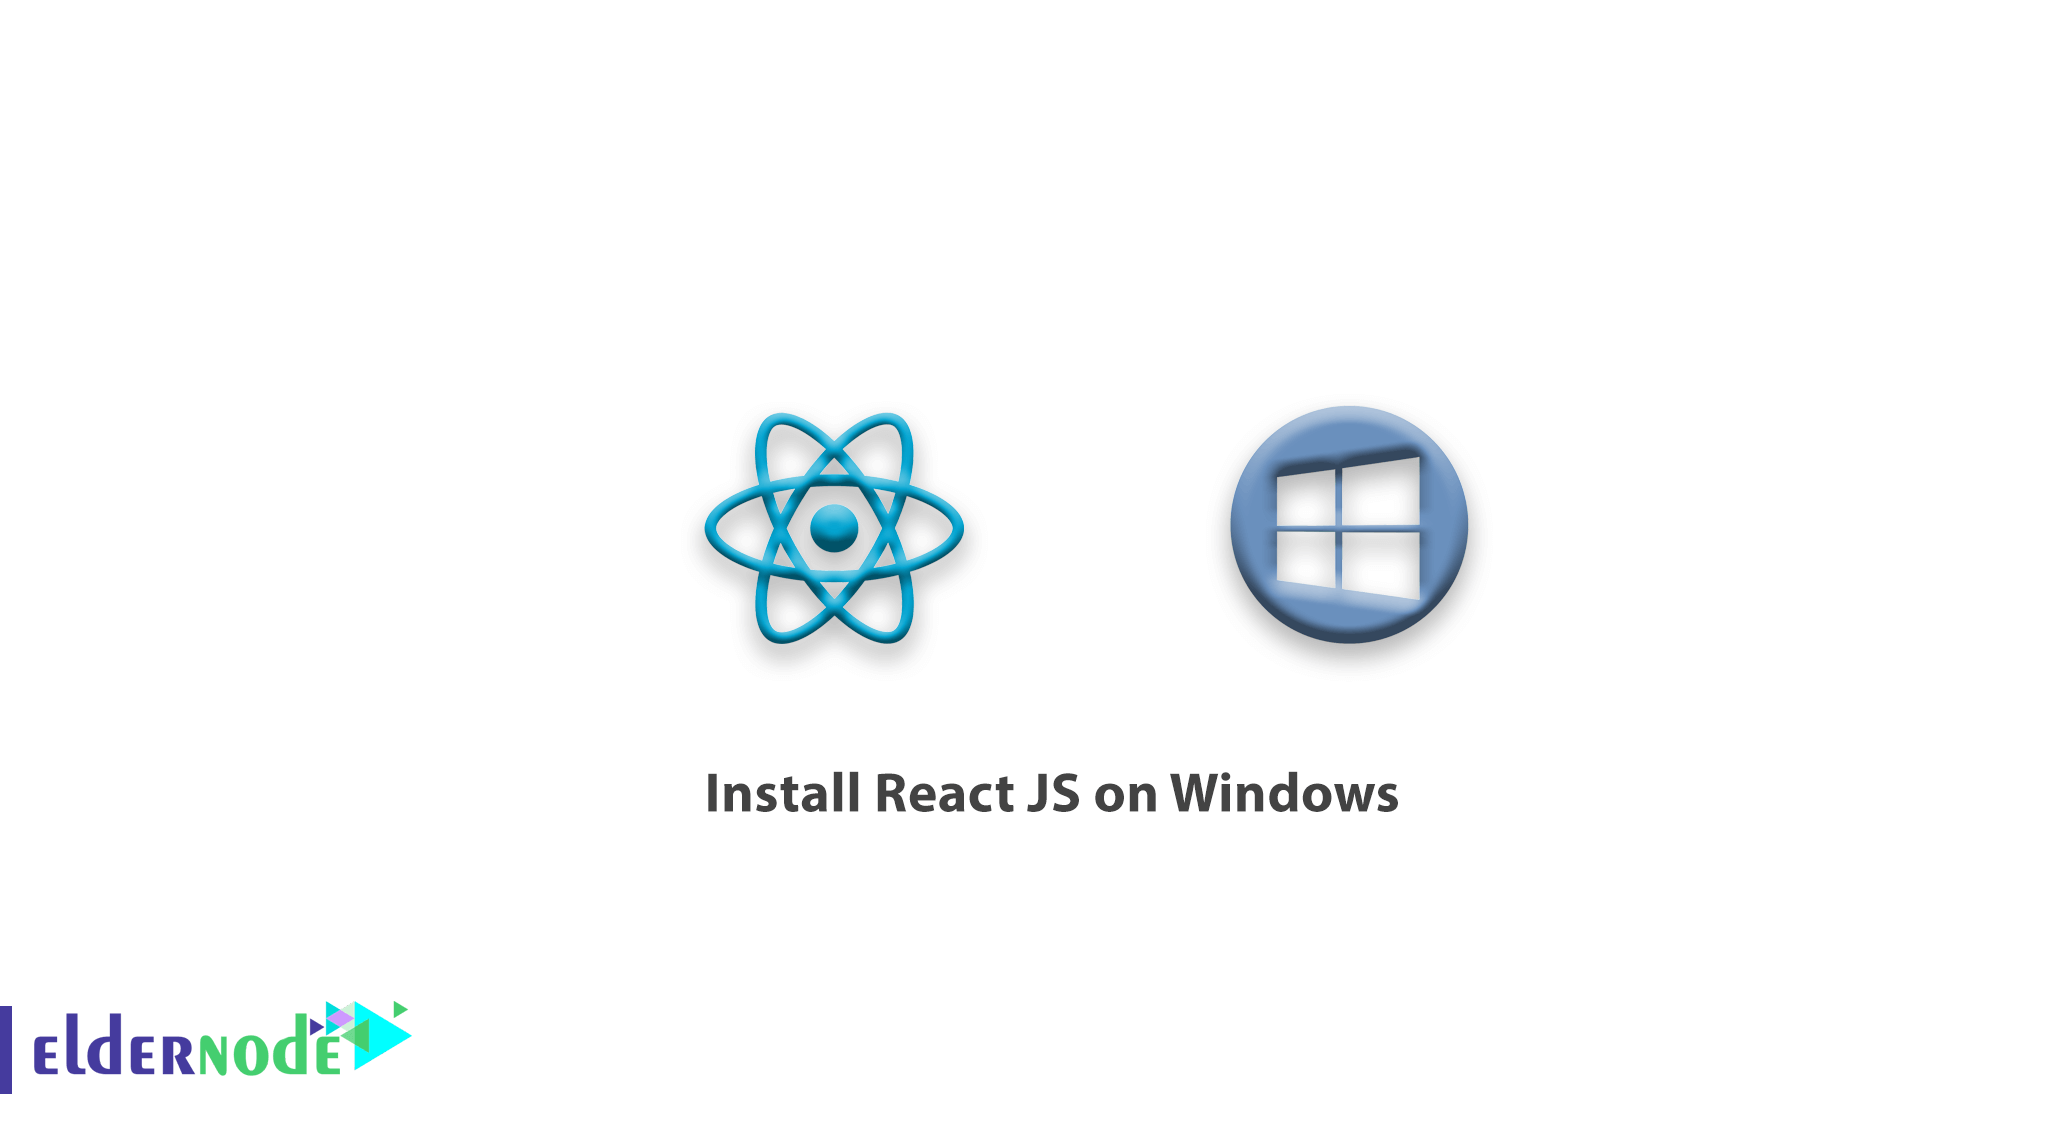 How to Install React JS on Windows